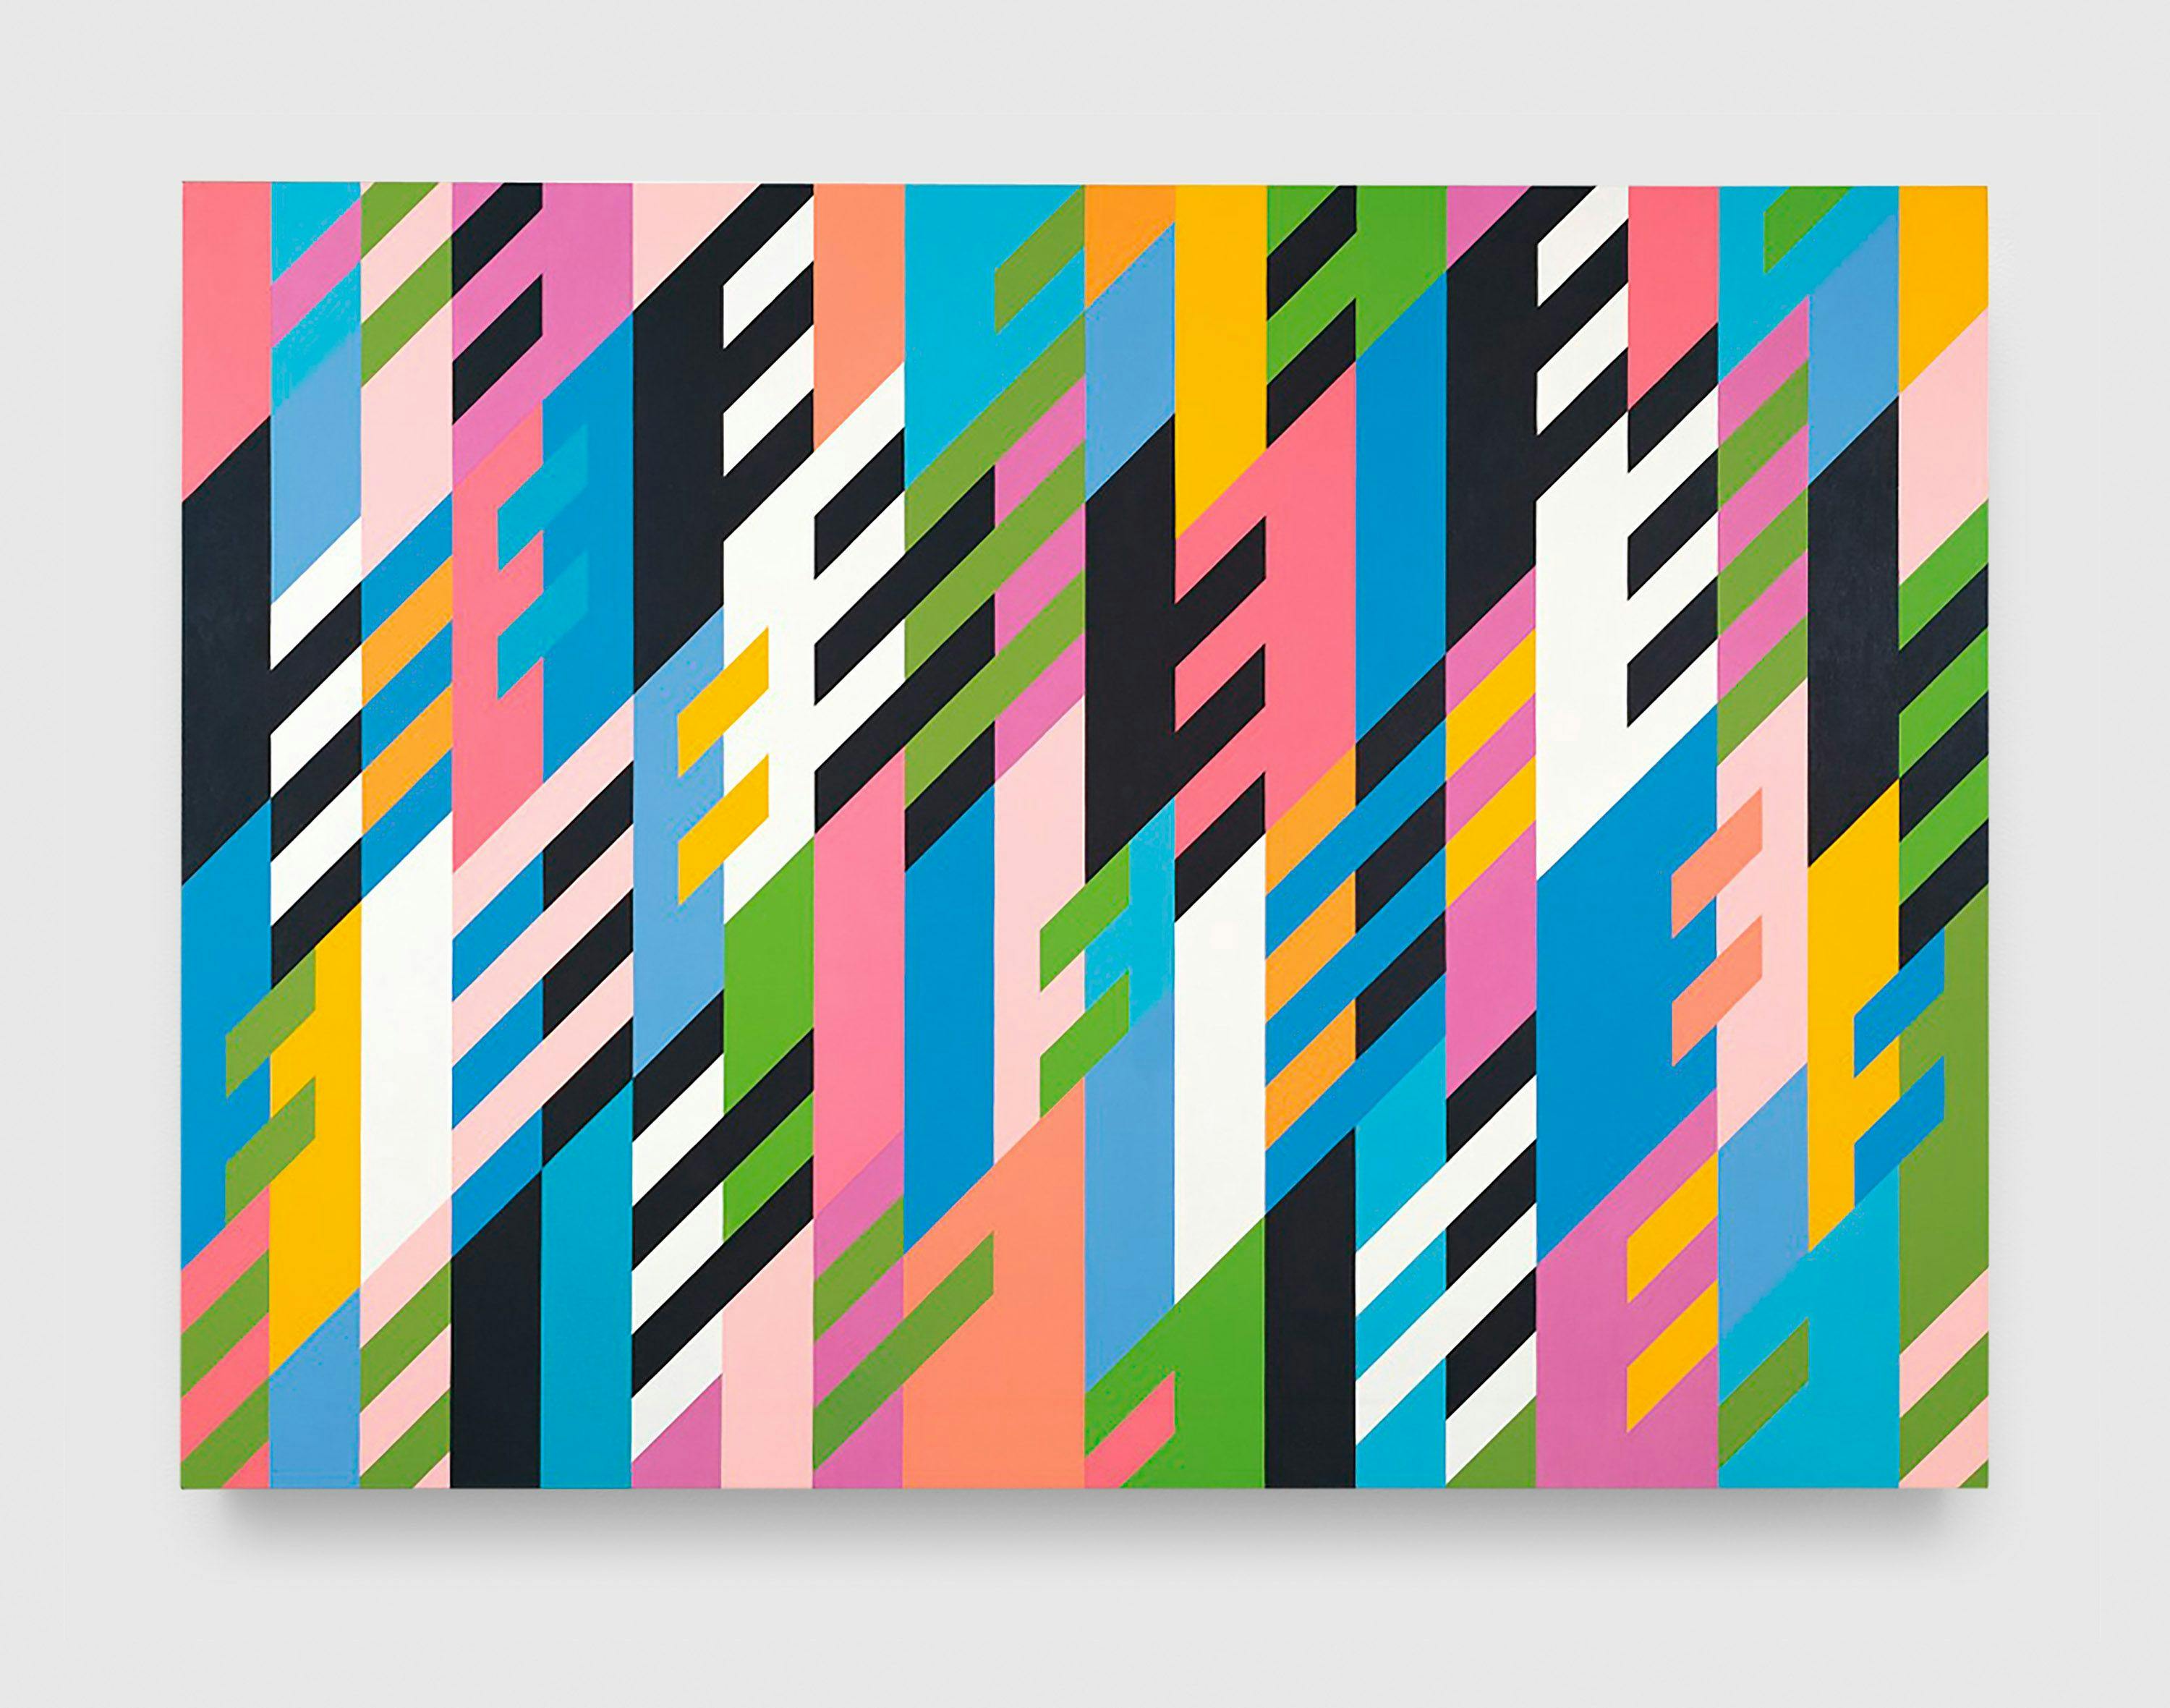 A painting by Bridget Riley, titled Justinian, dated 1988.